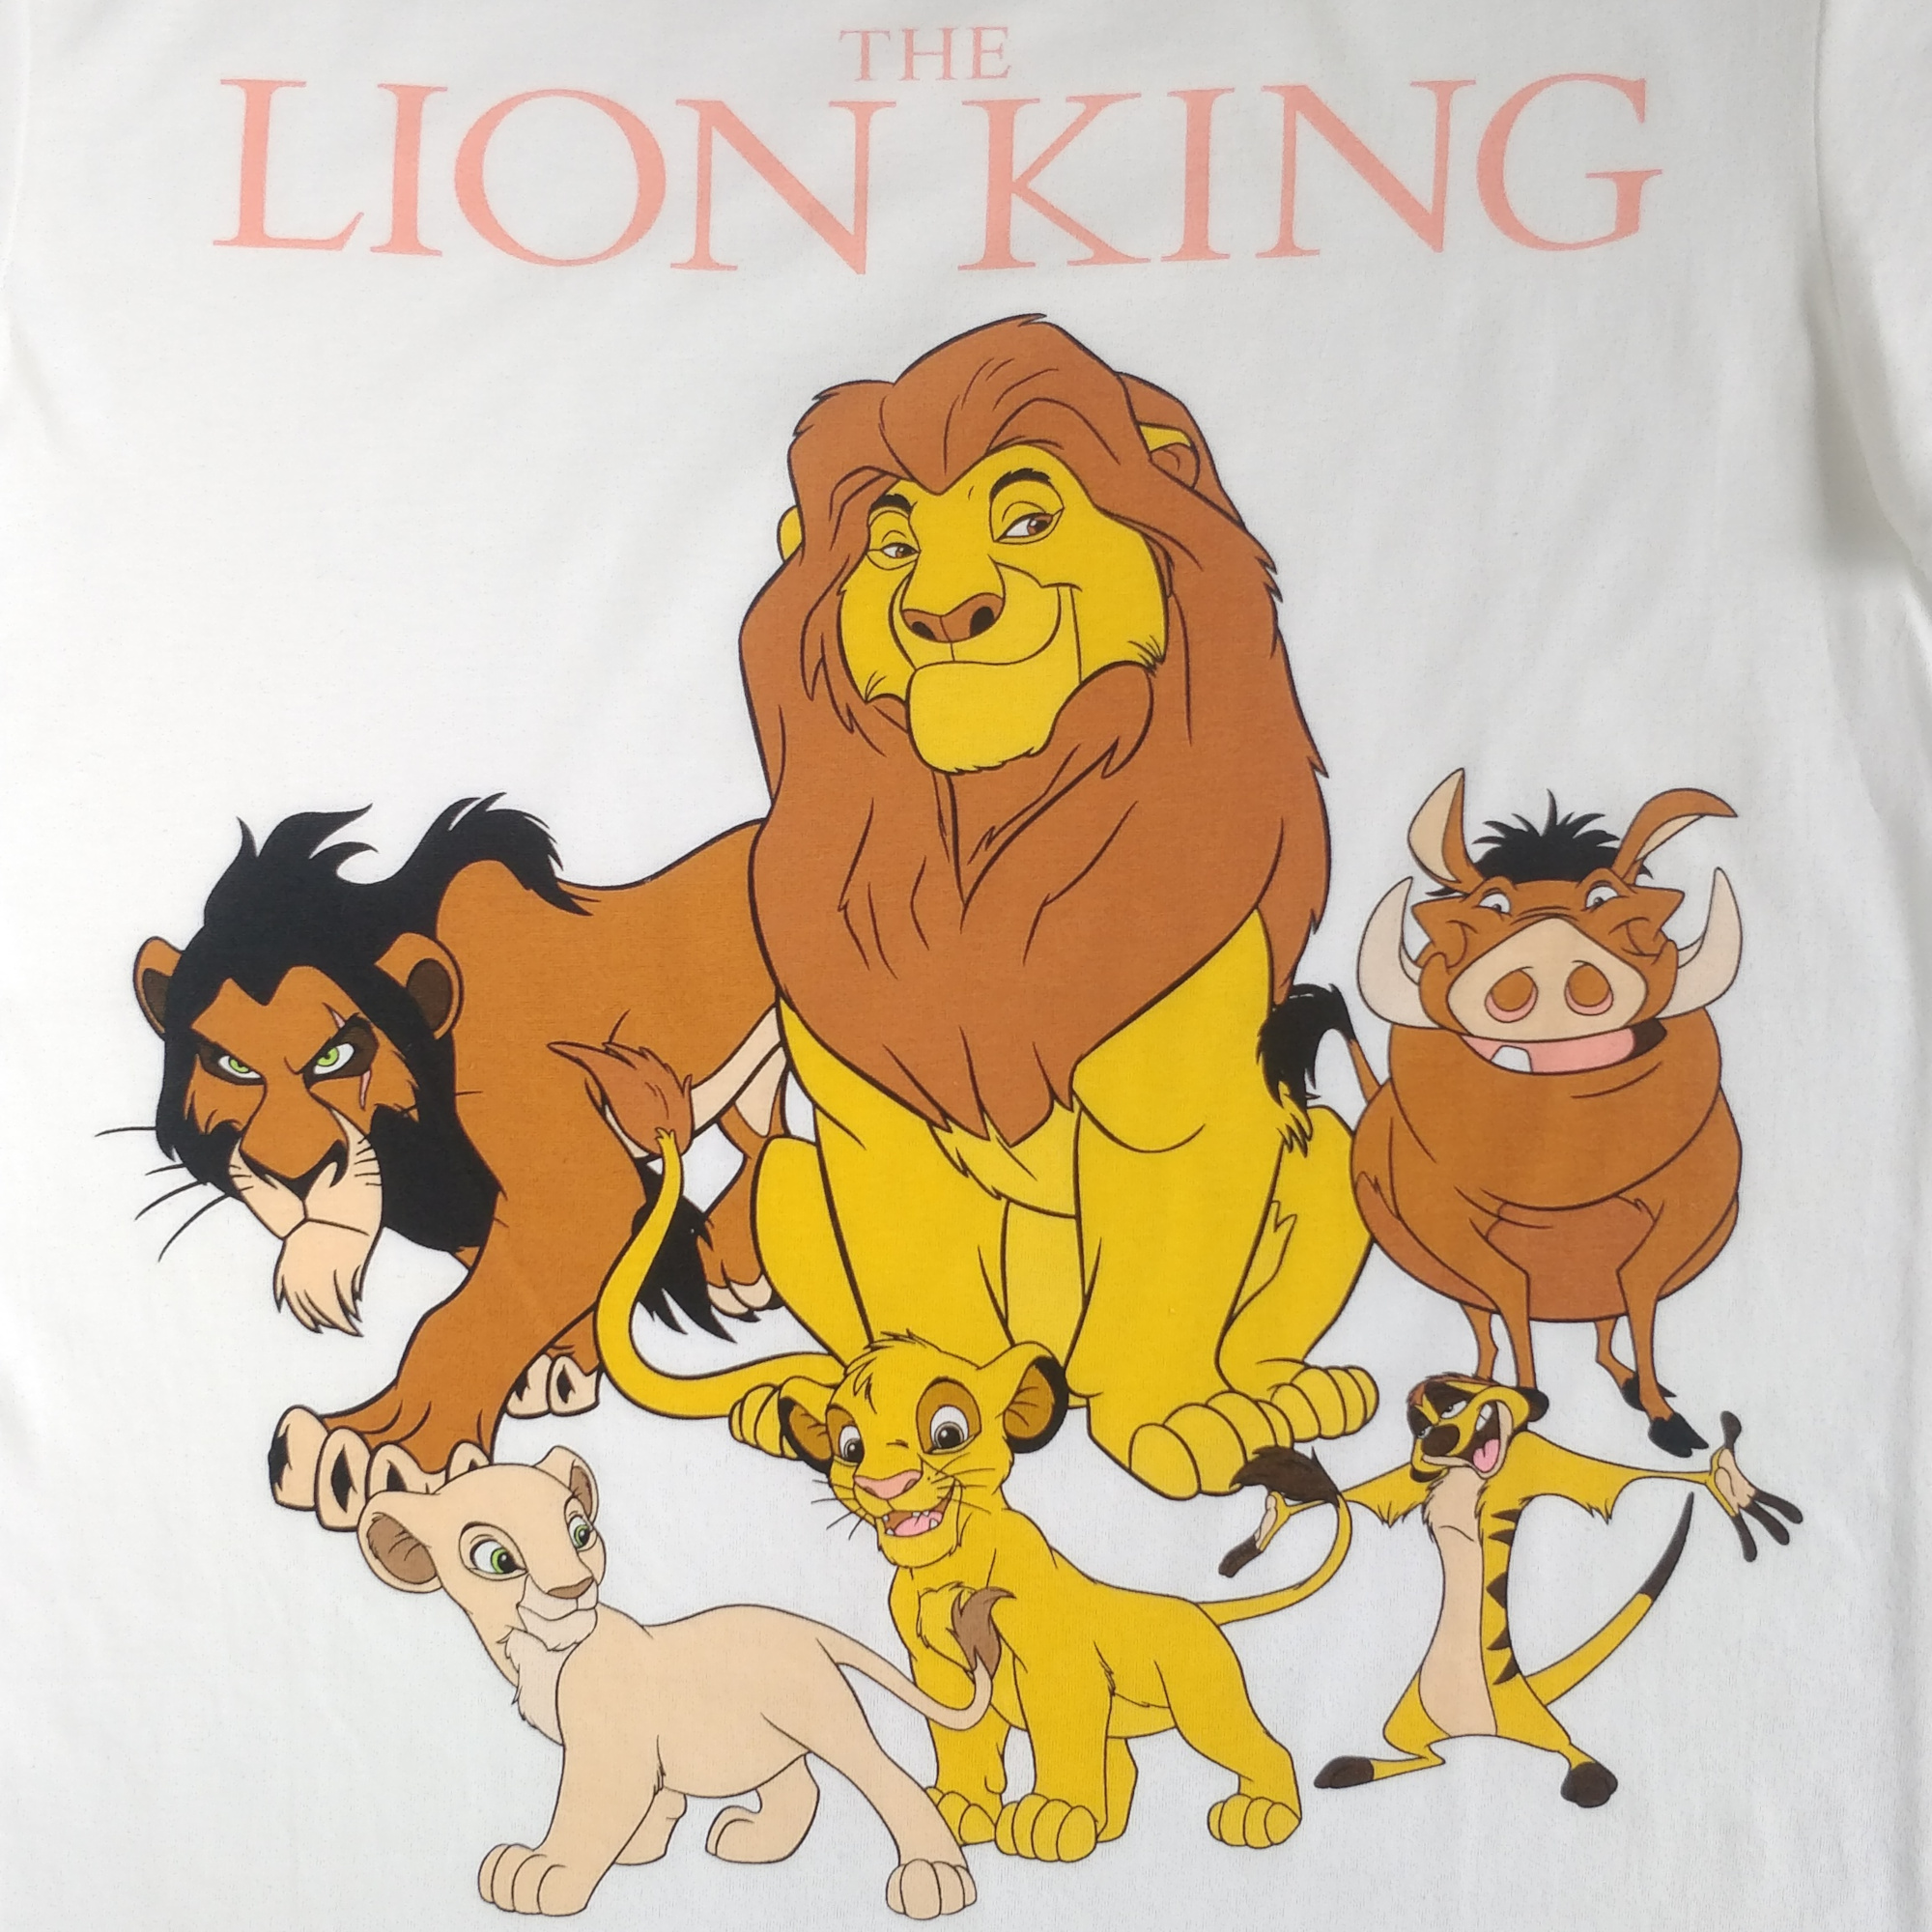 Disney | The Lion King Pyjamas | Women's Lounge Wear from World of Fables